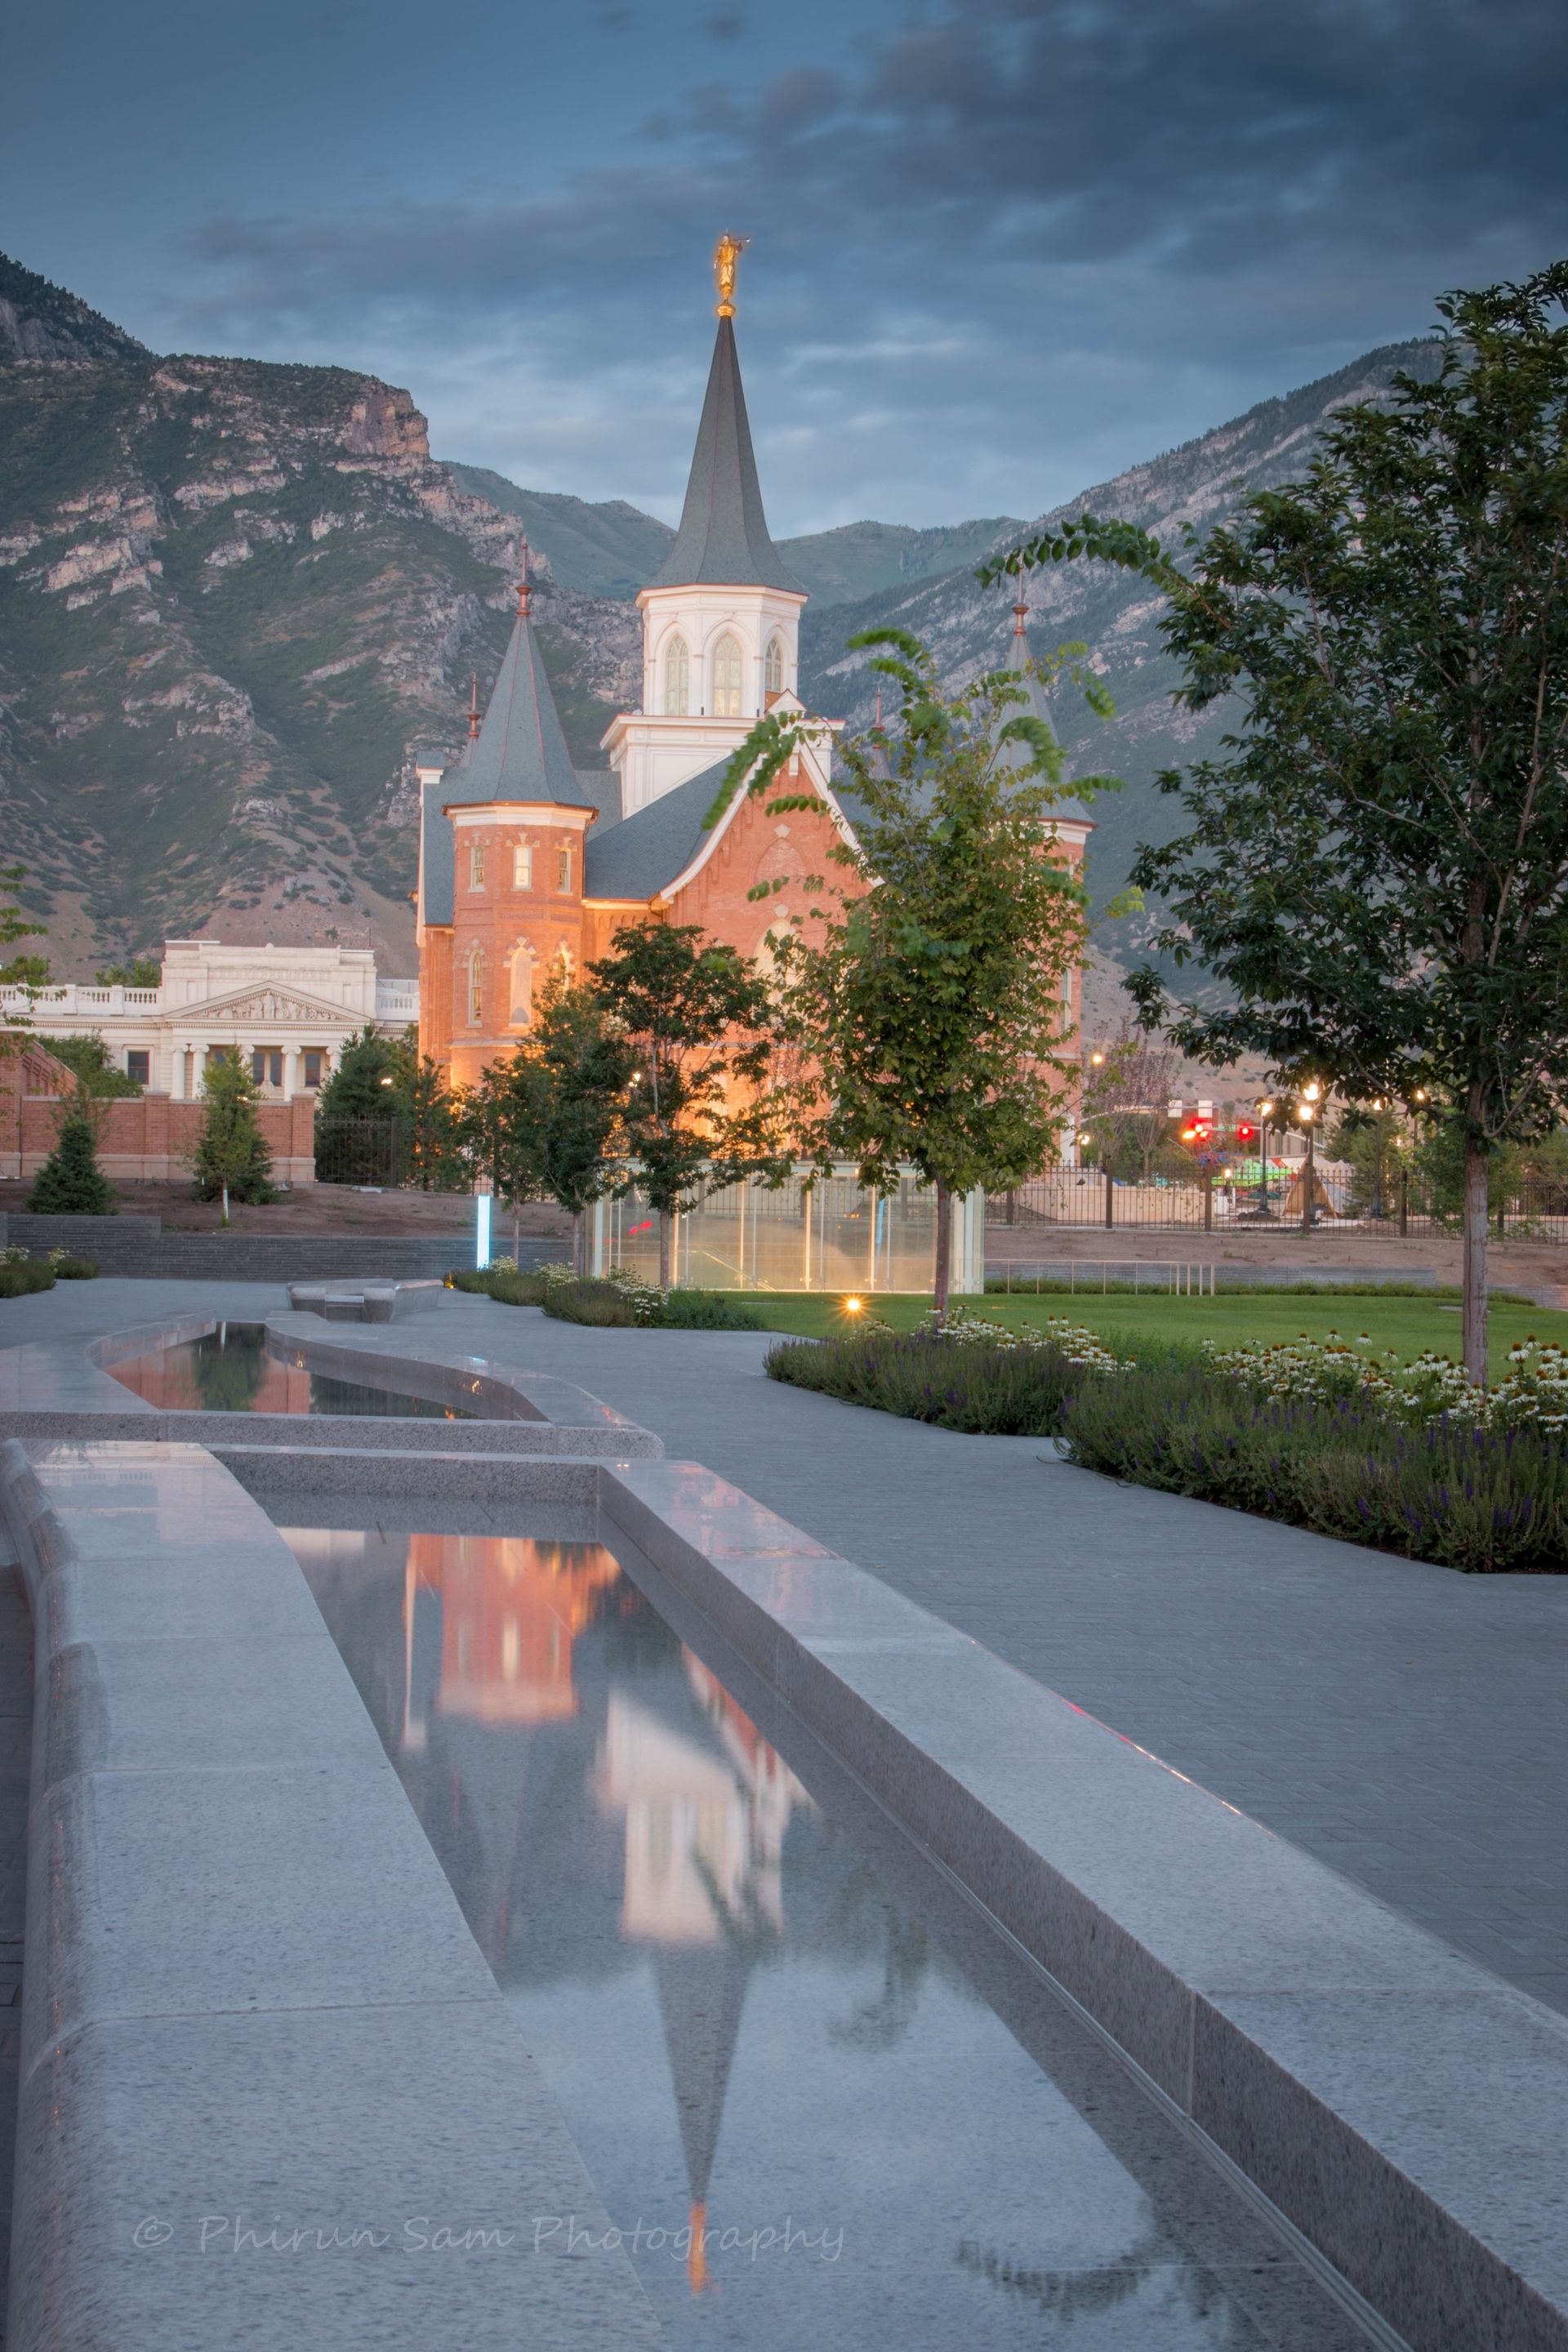 Reflecting pools and trees outside the Provo City Center Temple.